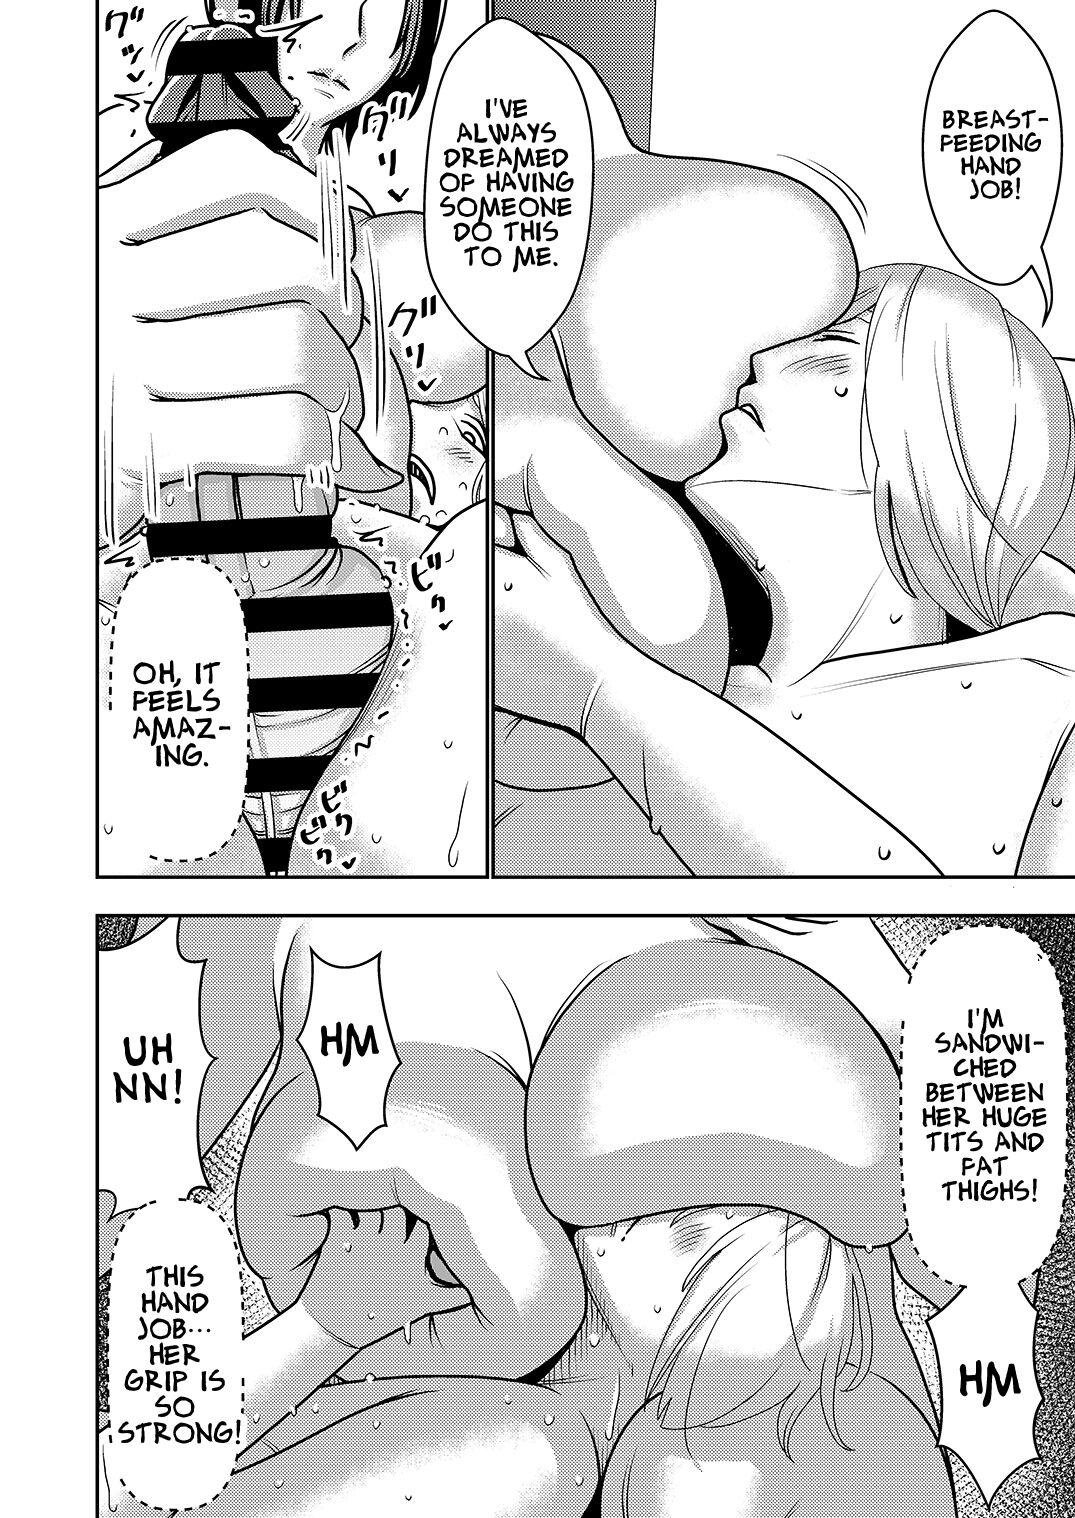 Secret This Defective Sexaroid is TOO LEWD, so I'm thinking of returning it! - Original Putaria - Page 10